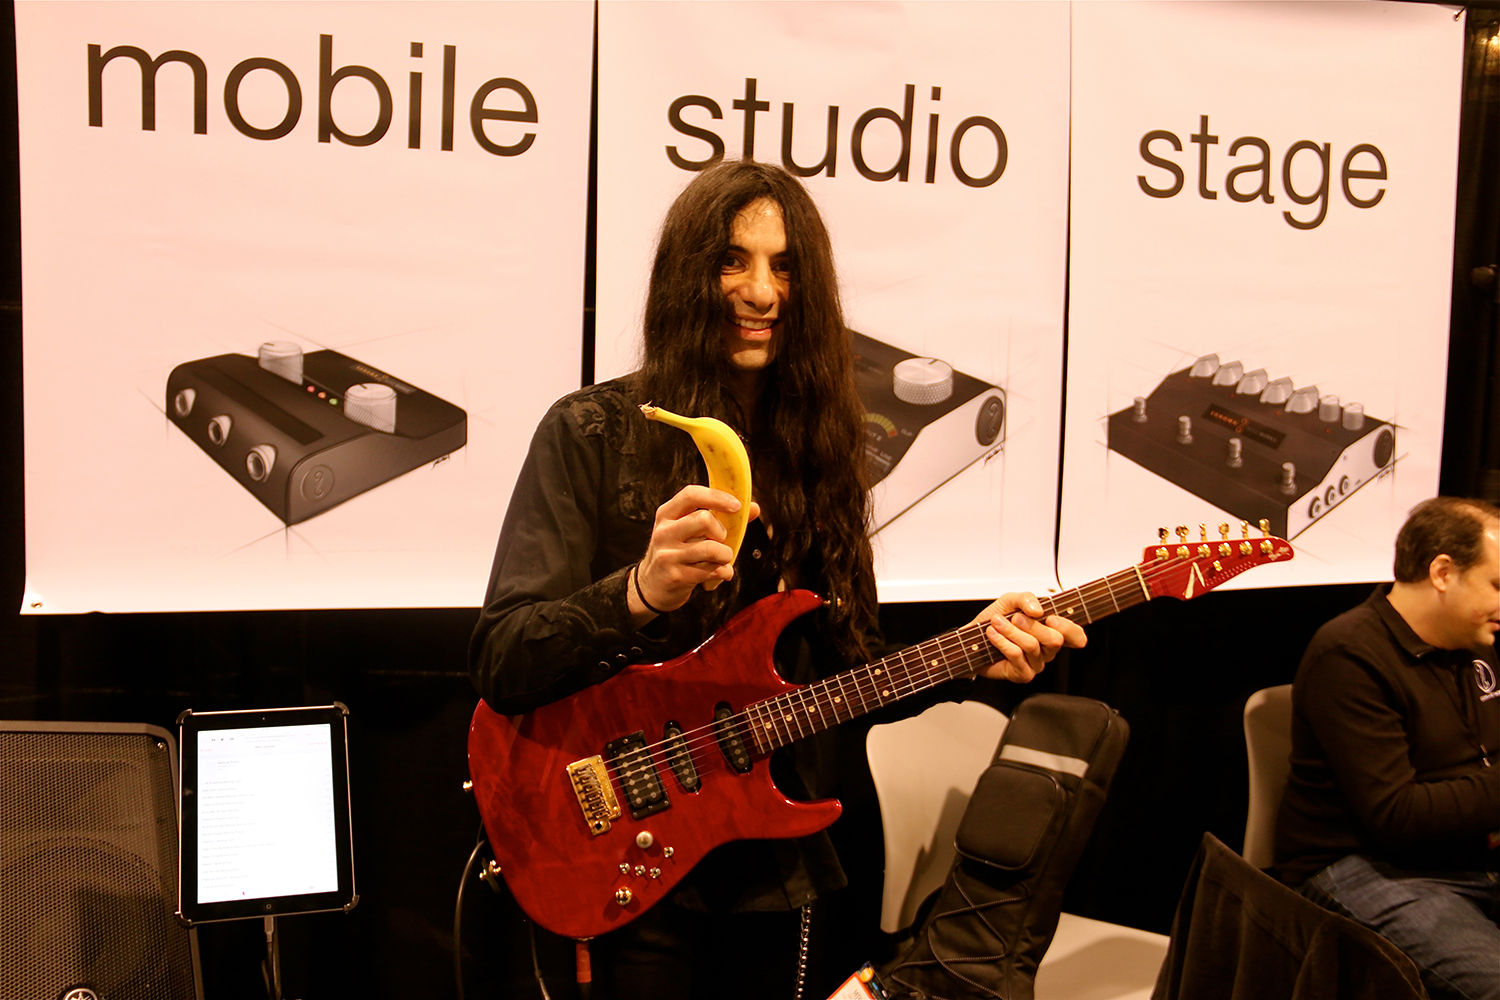 Mike Campese NAMM 2016, photo by Terry Bert. Banana.